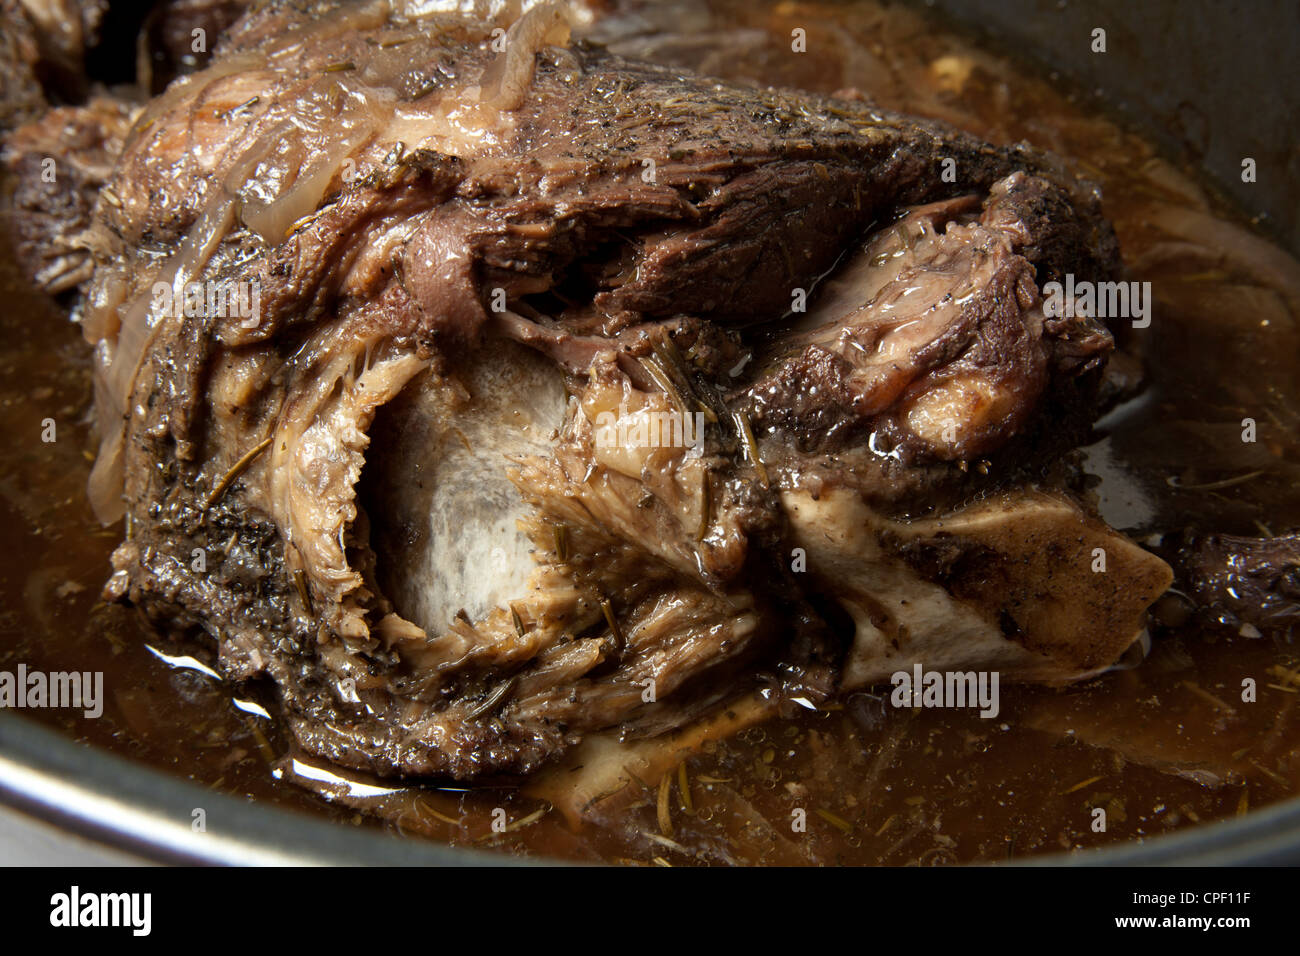 leg of mutton braised in red wine Stock Photo